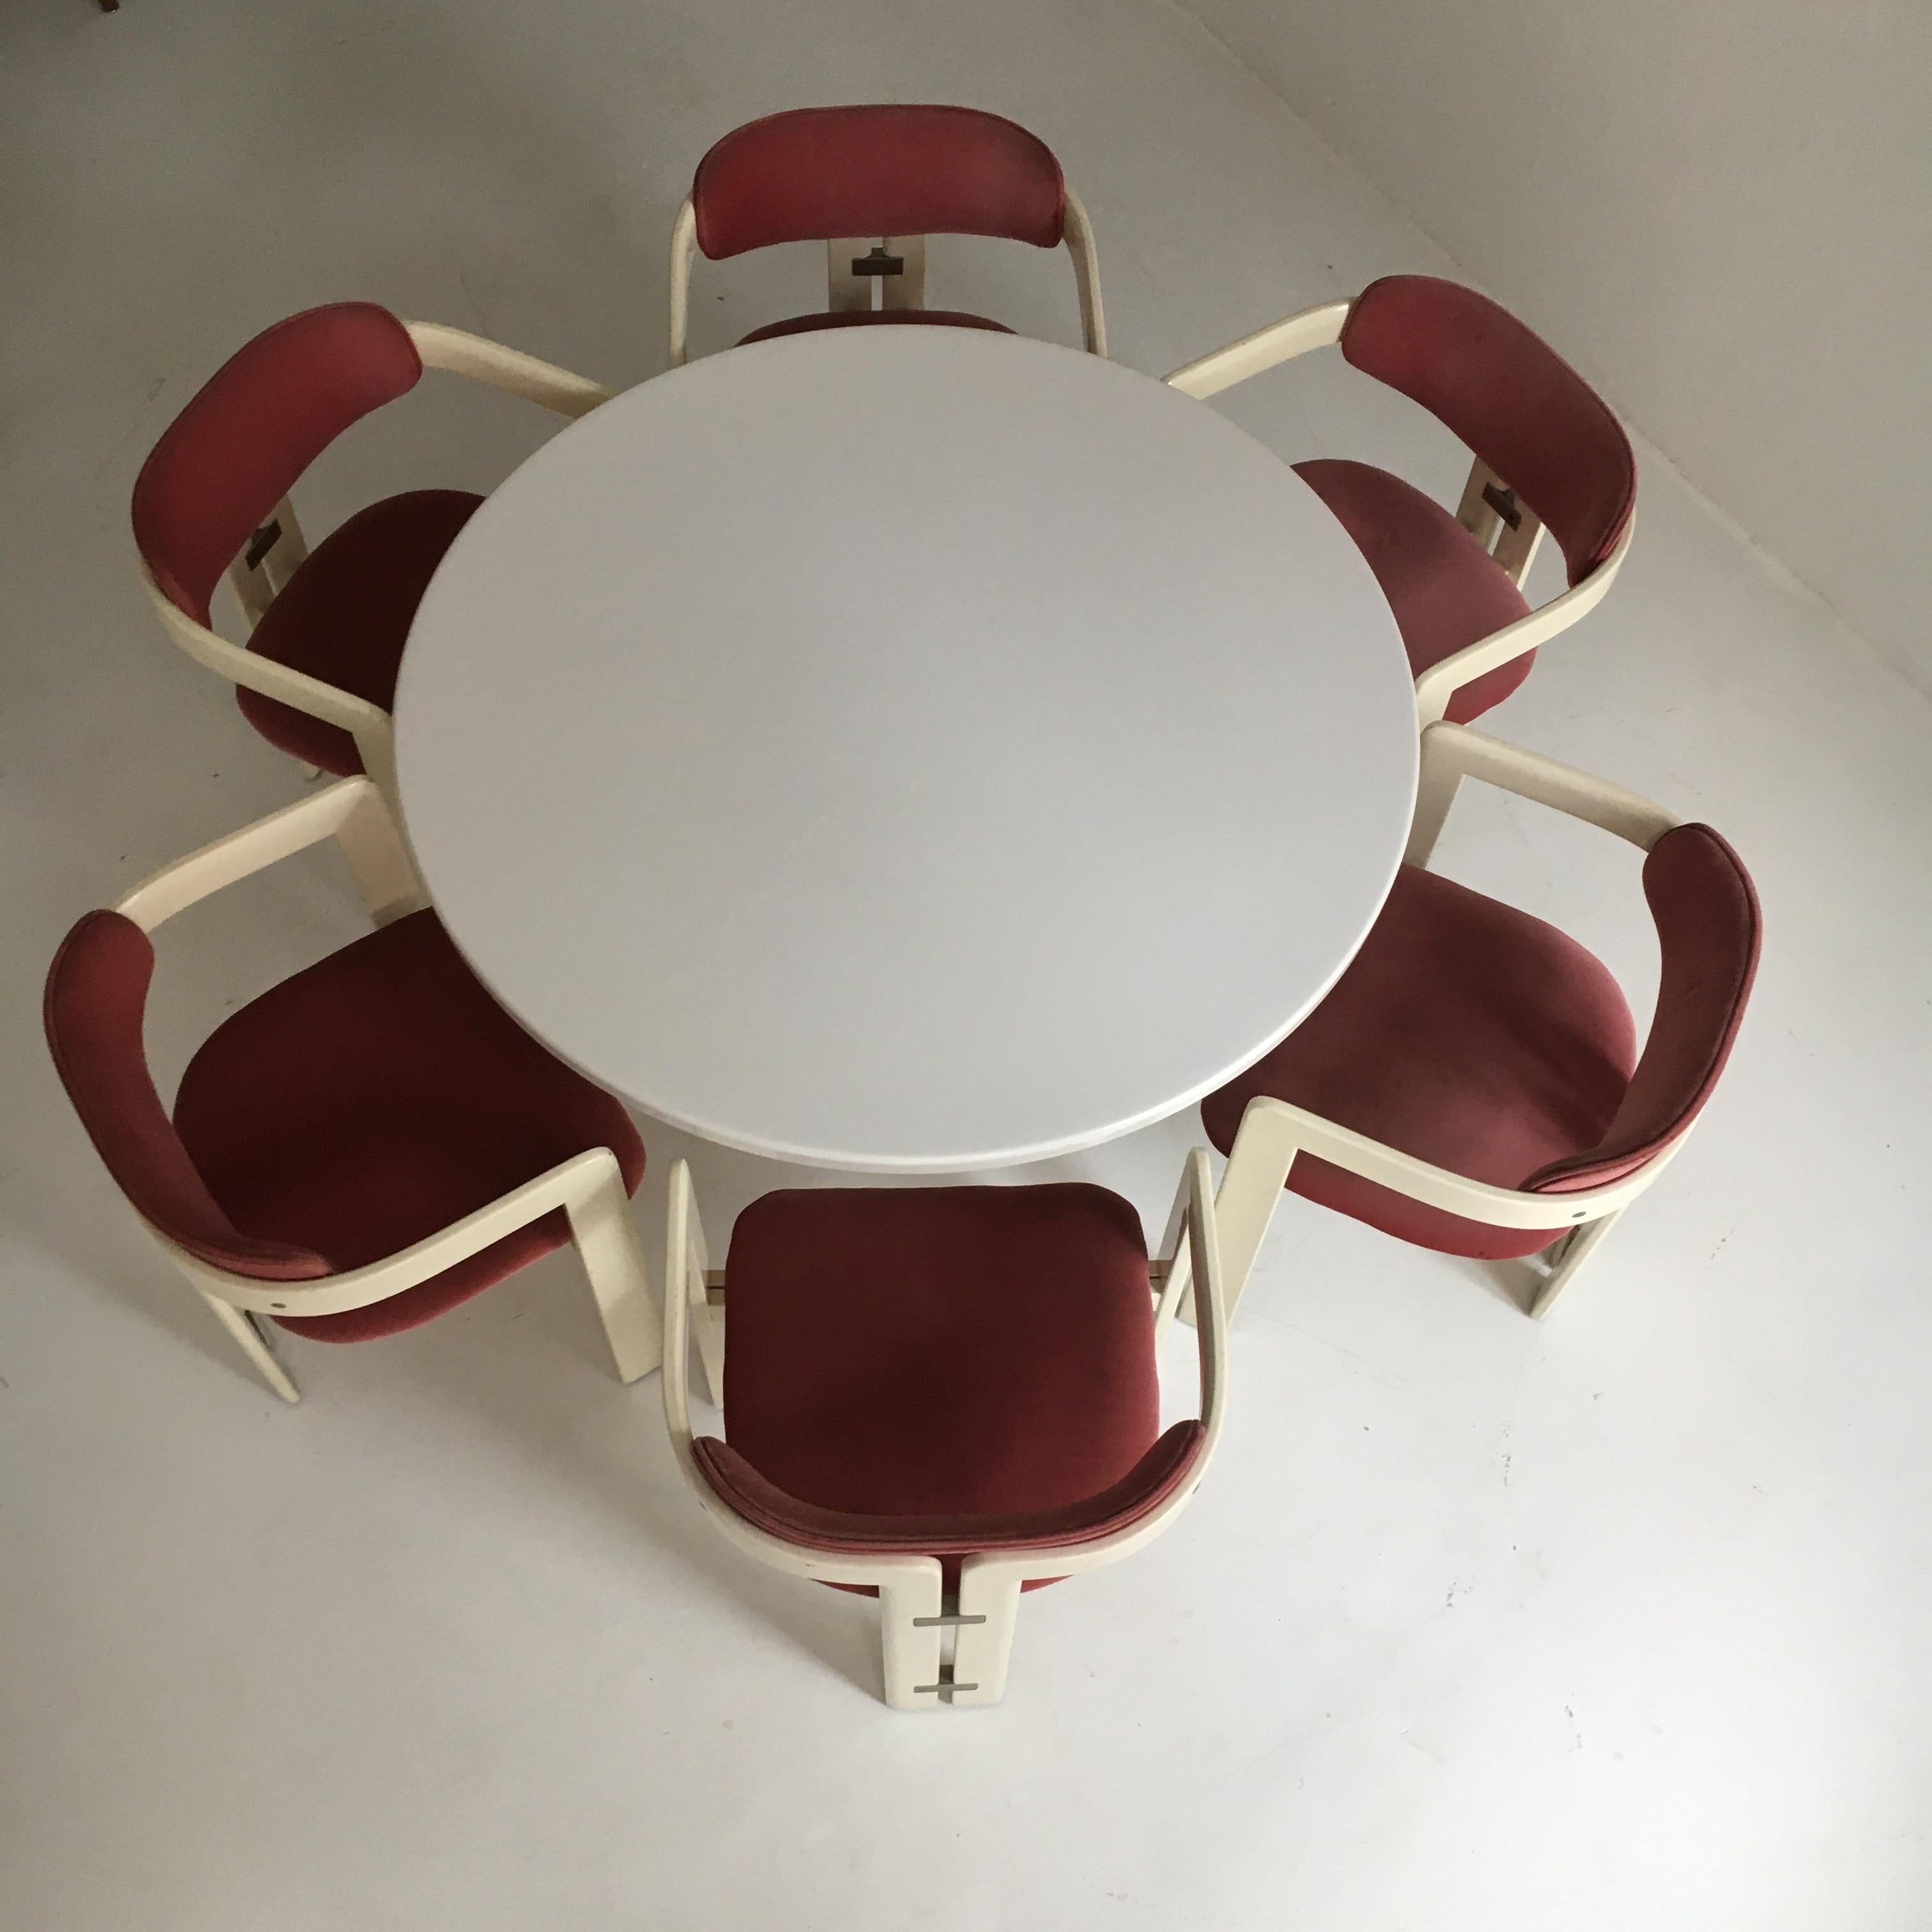 Dining Table by Anna Castelli Ferrieri, Ignazio Gardella for Kartell, Italy 1965 For Sale 8